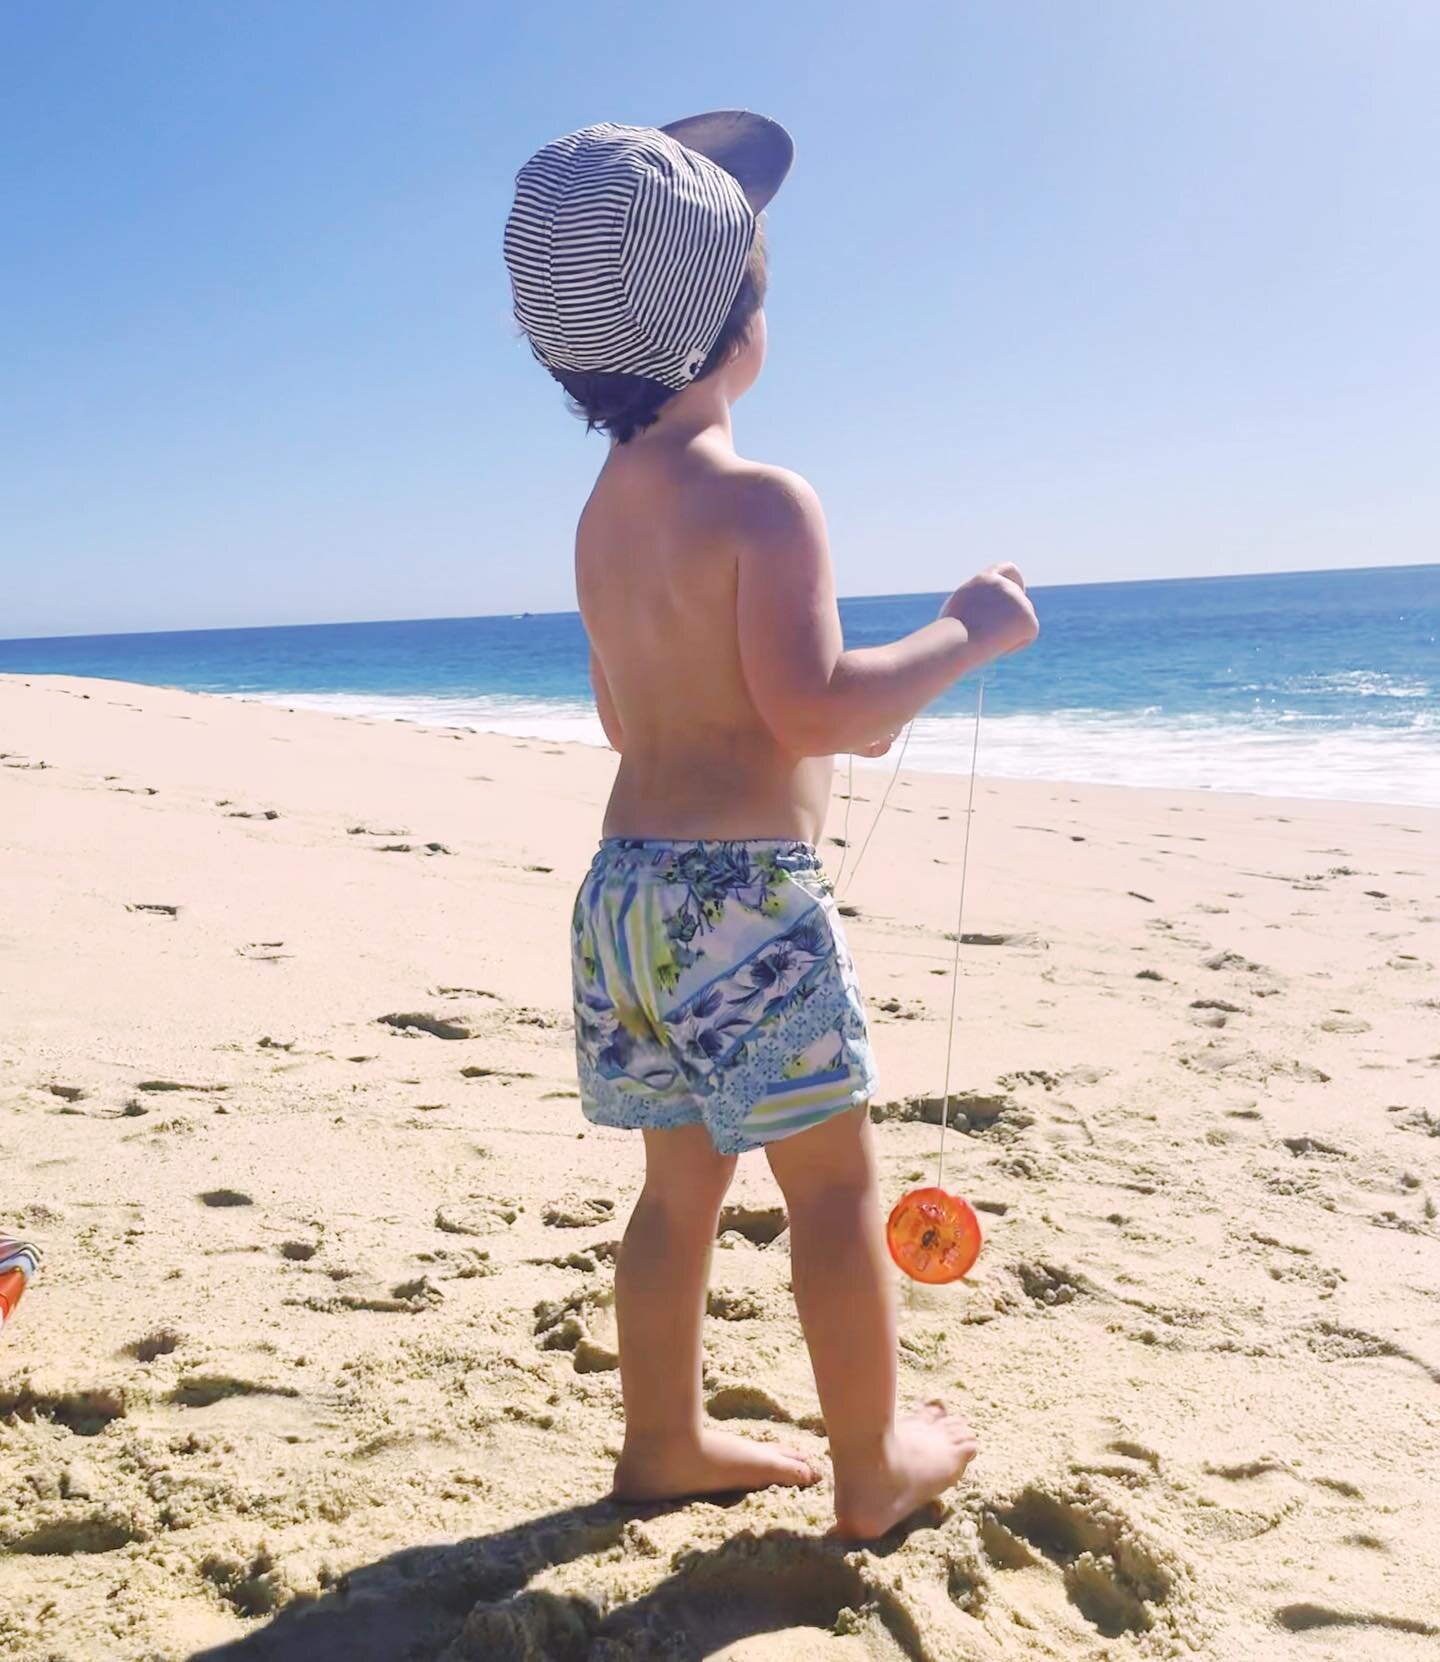 Yo-yo at the beach? I like your style kid 🪀 

Tropical Citrus Kids Boardshort 🍋 Available in sizes 6m-5yr

#groovy #kidsswimwear #playfulprints #summer2022 #toddlerswim #babyswimsuit #kidsswimsuit #kidsboardshorts #toddlerapparel #babyswim